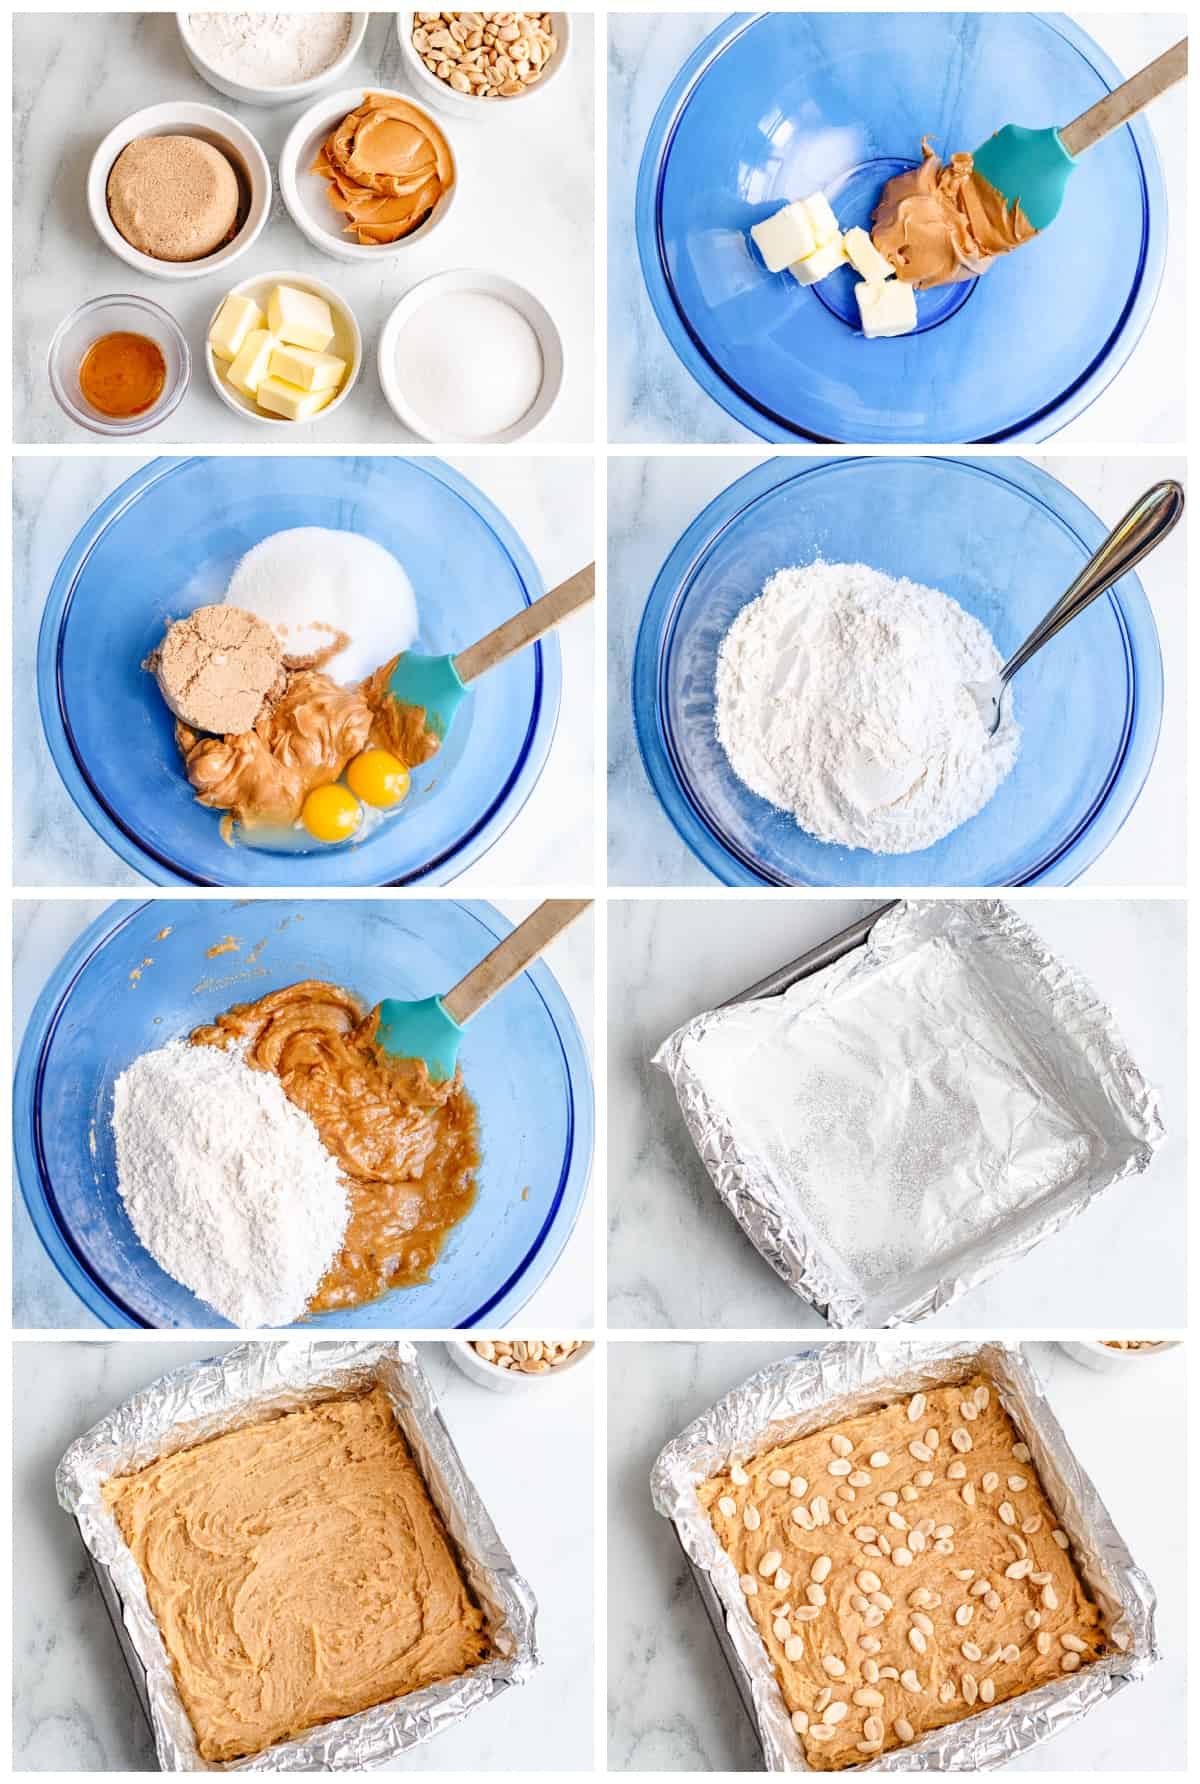 how to make peanut butter blondies step by step photo instructions 